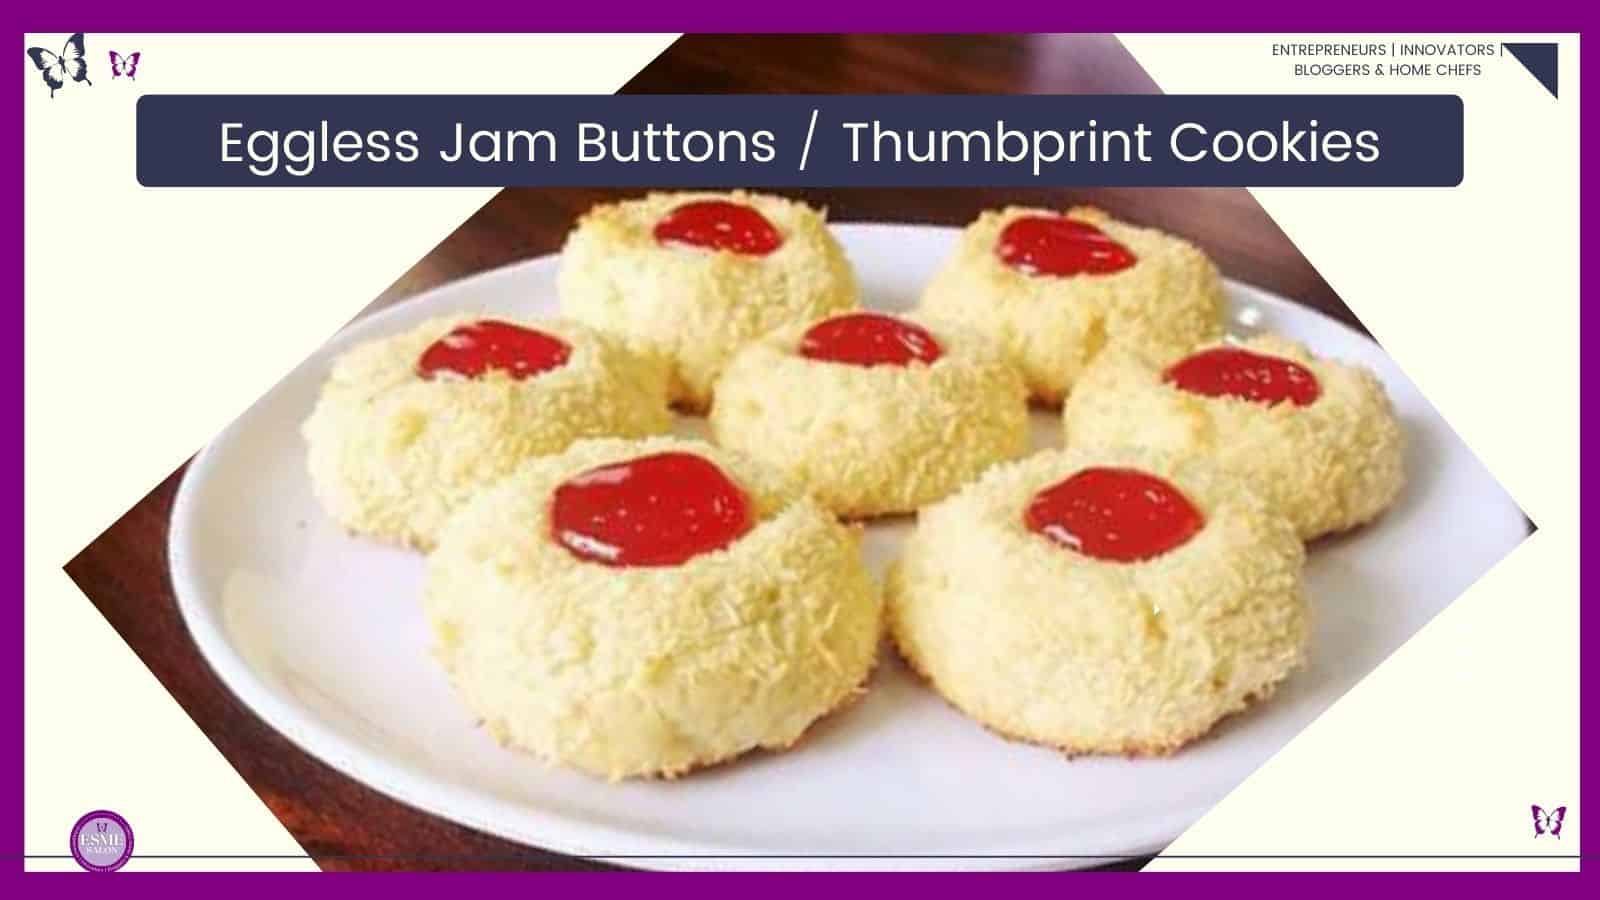 an image of Eggless Jam Buttons also called Thumbprint Cookies covered in coconut with a jam centre